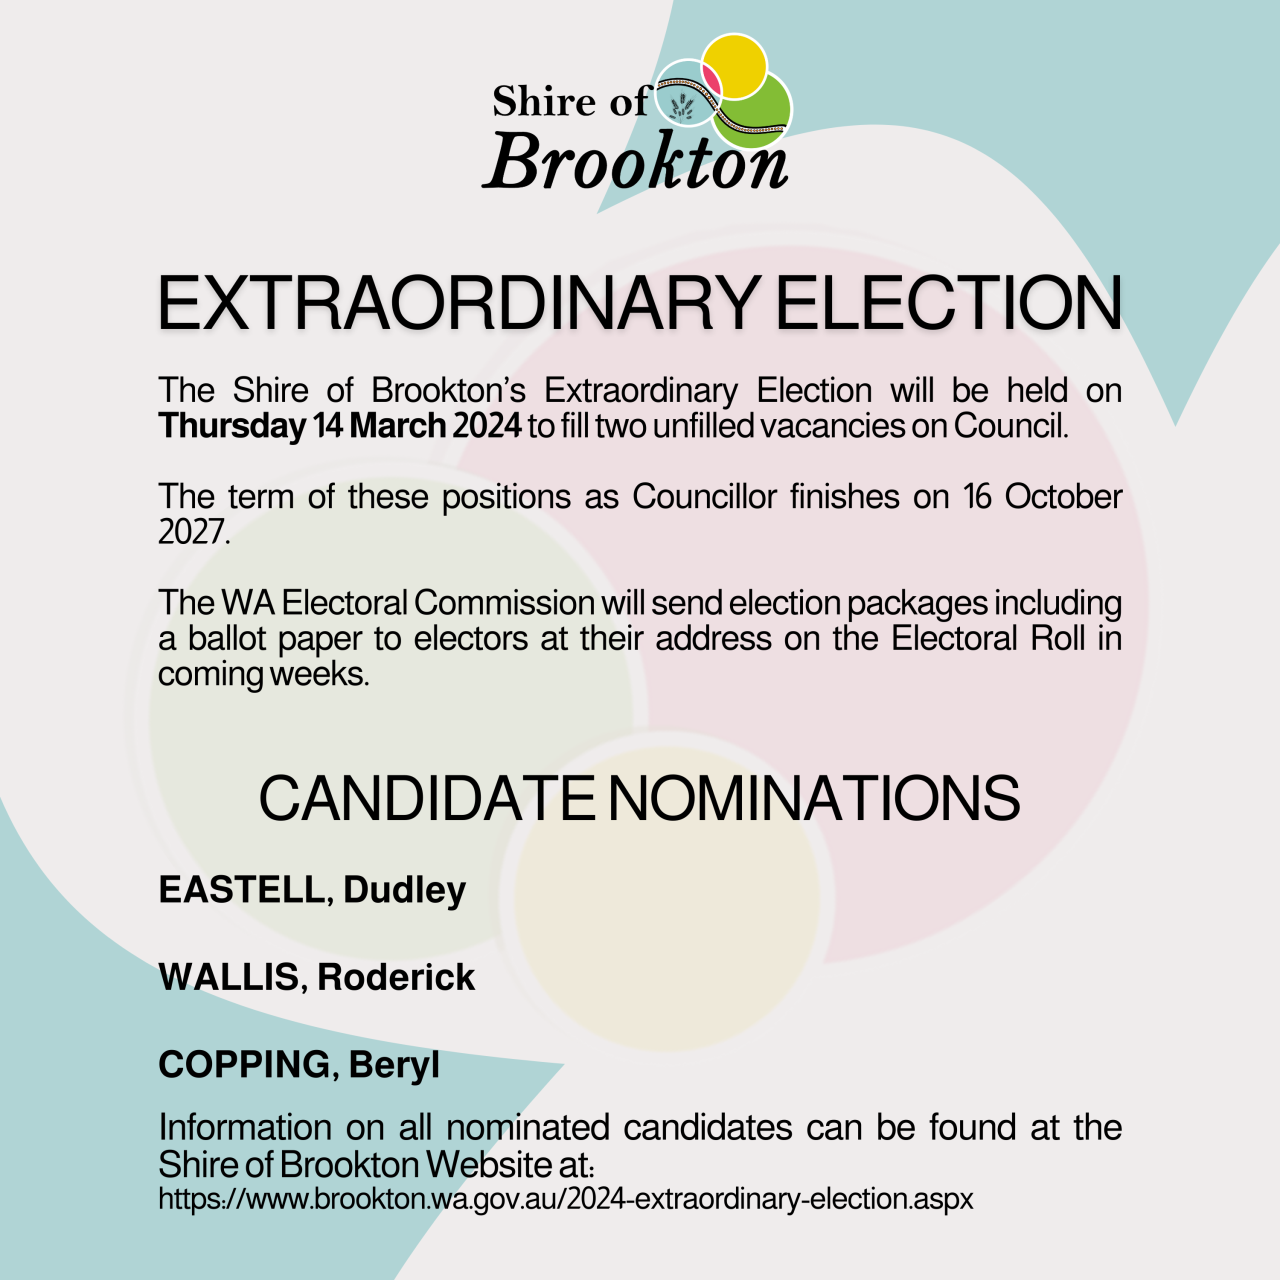 2024 Local Government Extraordinary Election - Candidate Nominations